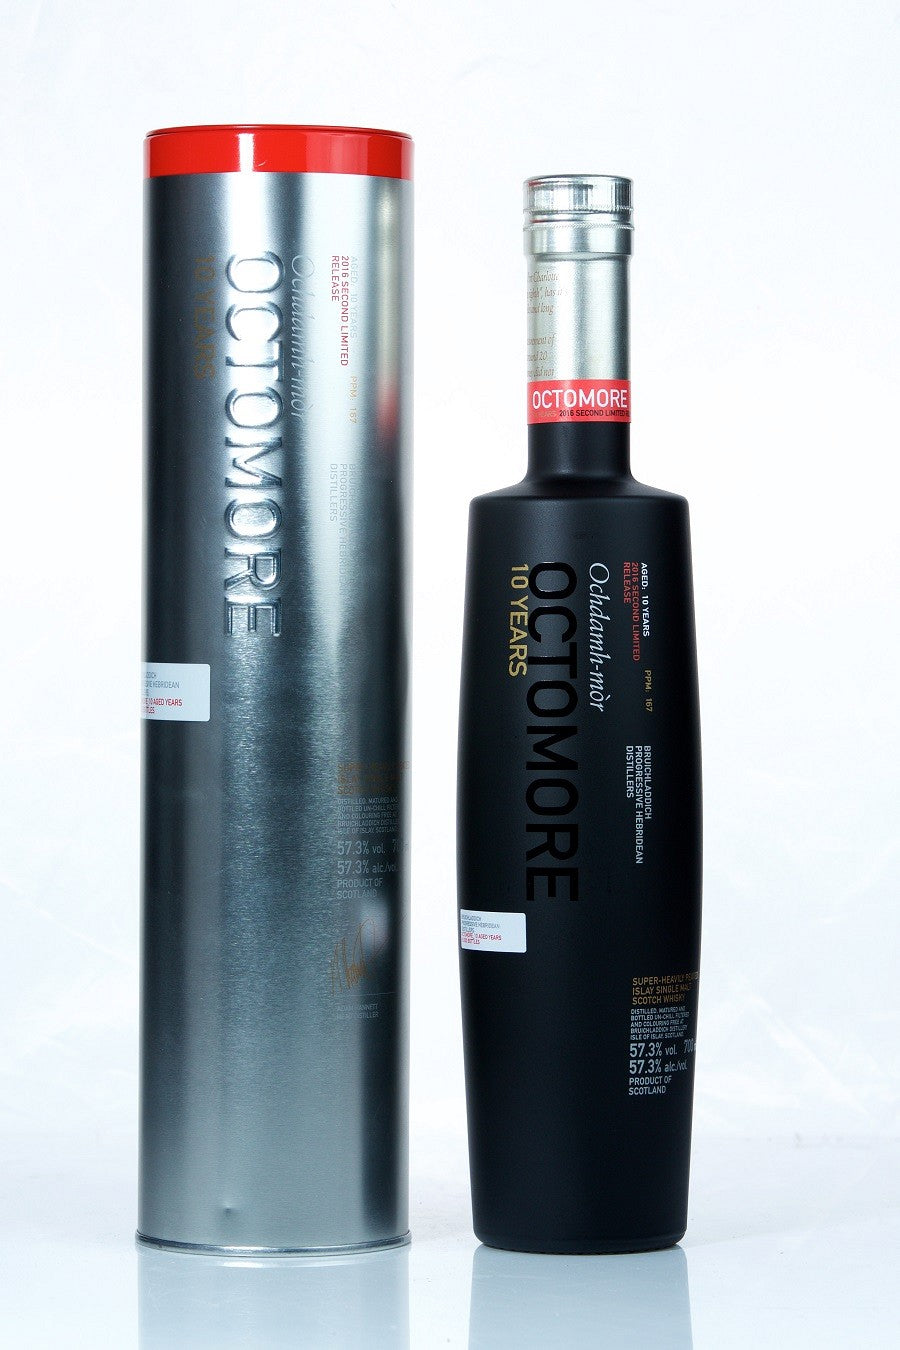 Octomore 10 Years (2nd edition)